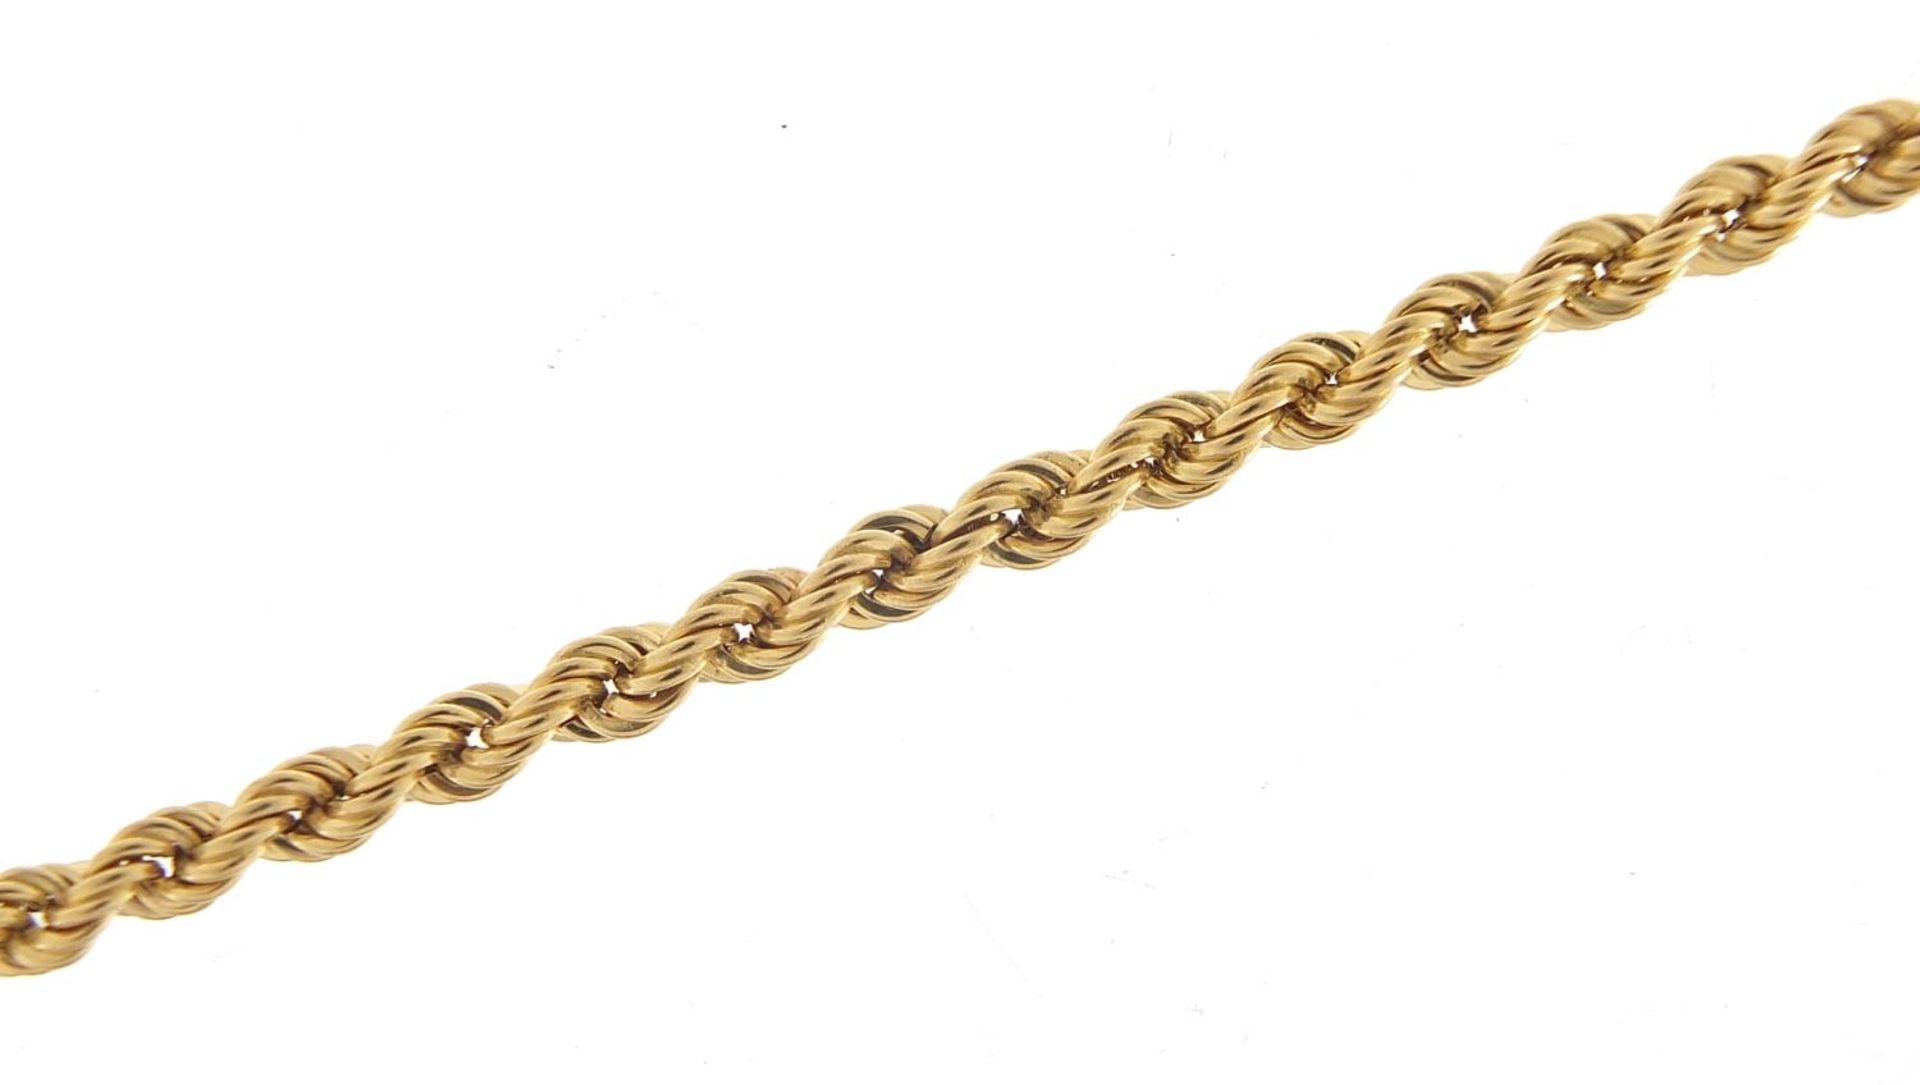 9ct gold rope twist necklace, 48cm in length, 5.8g : For Further Condition Reports Please Visit